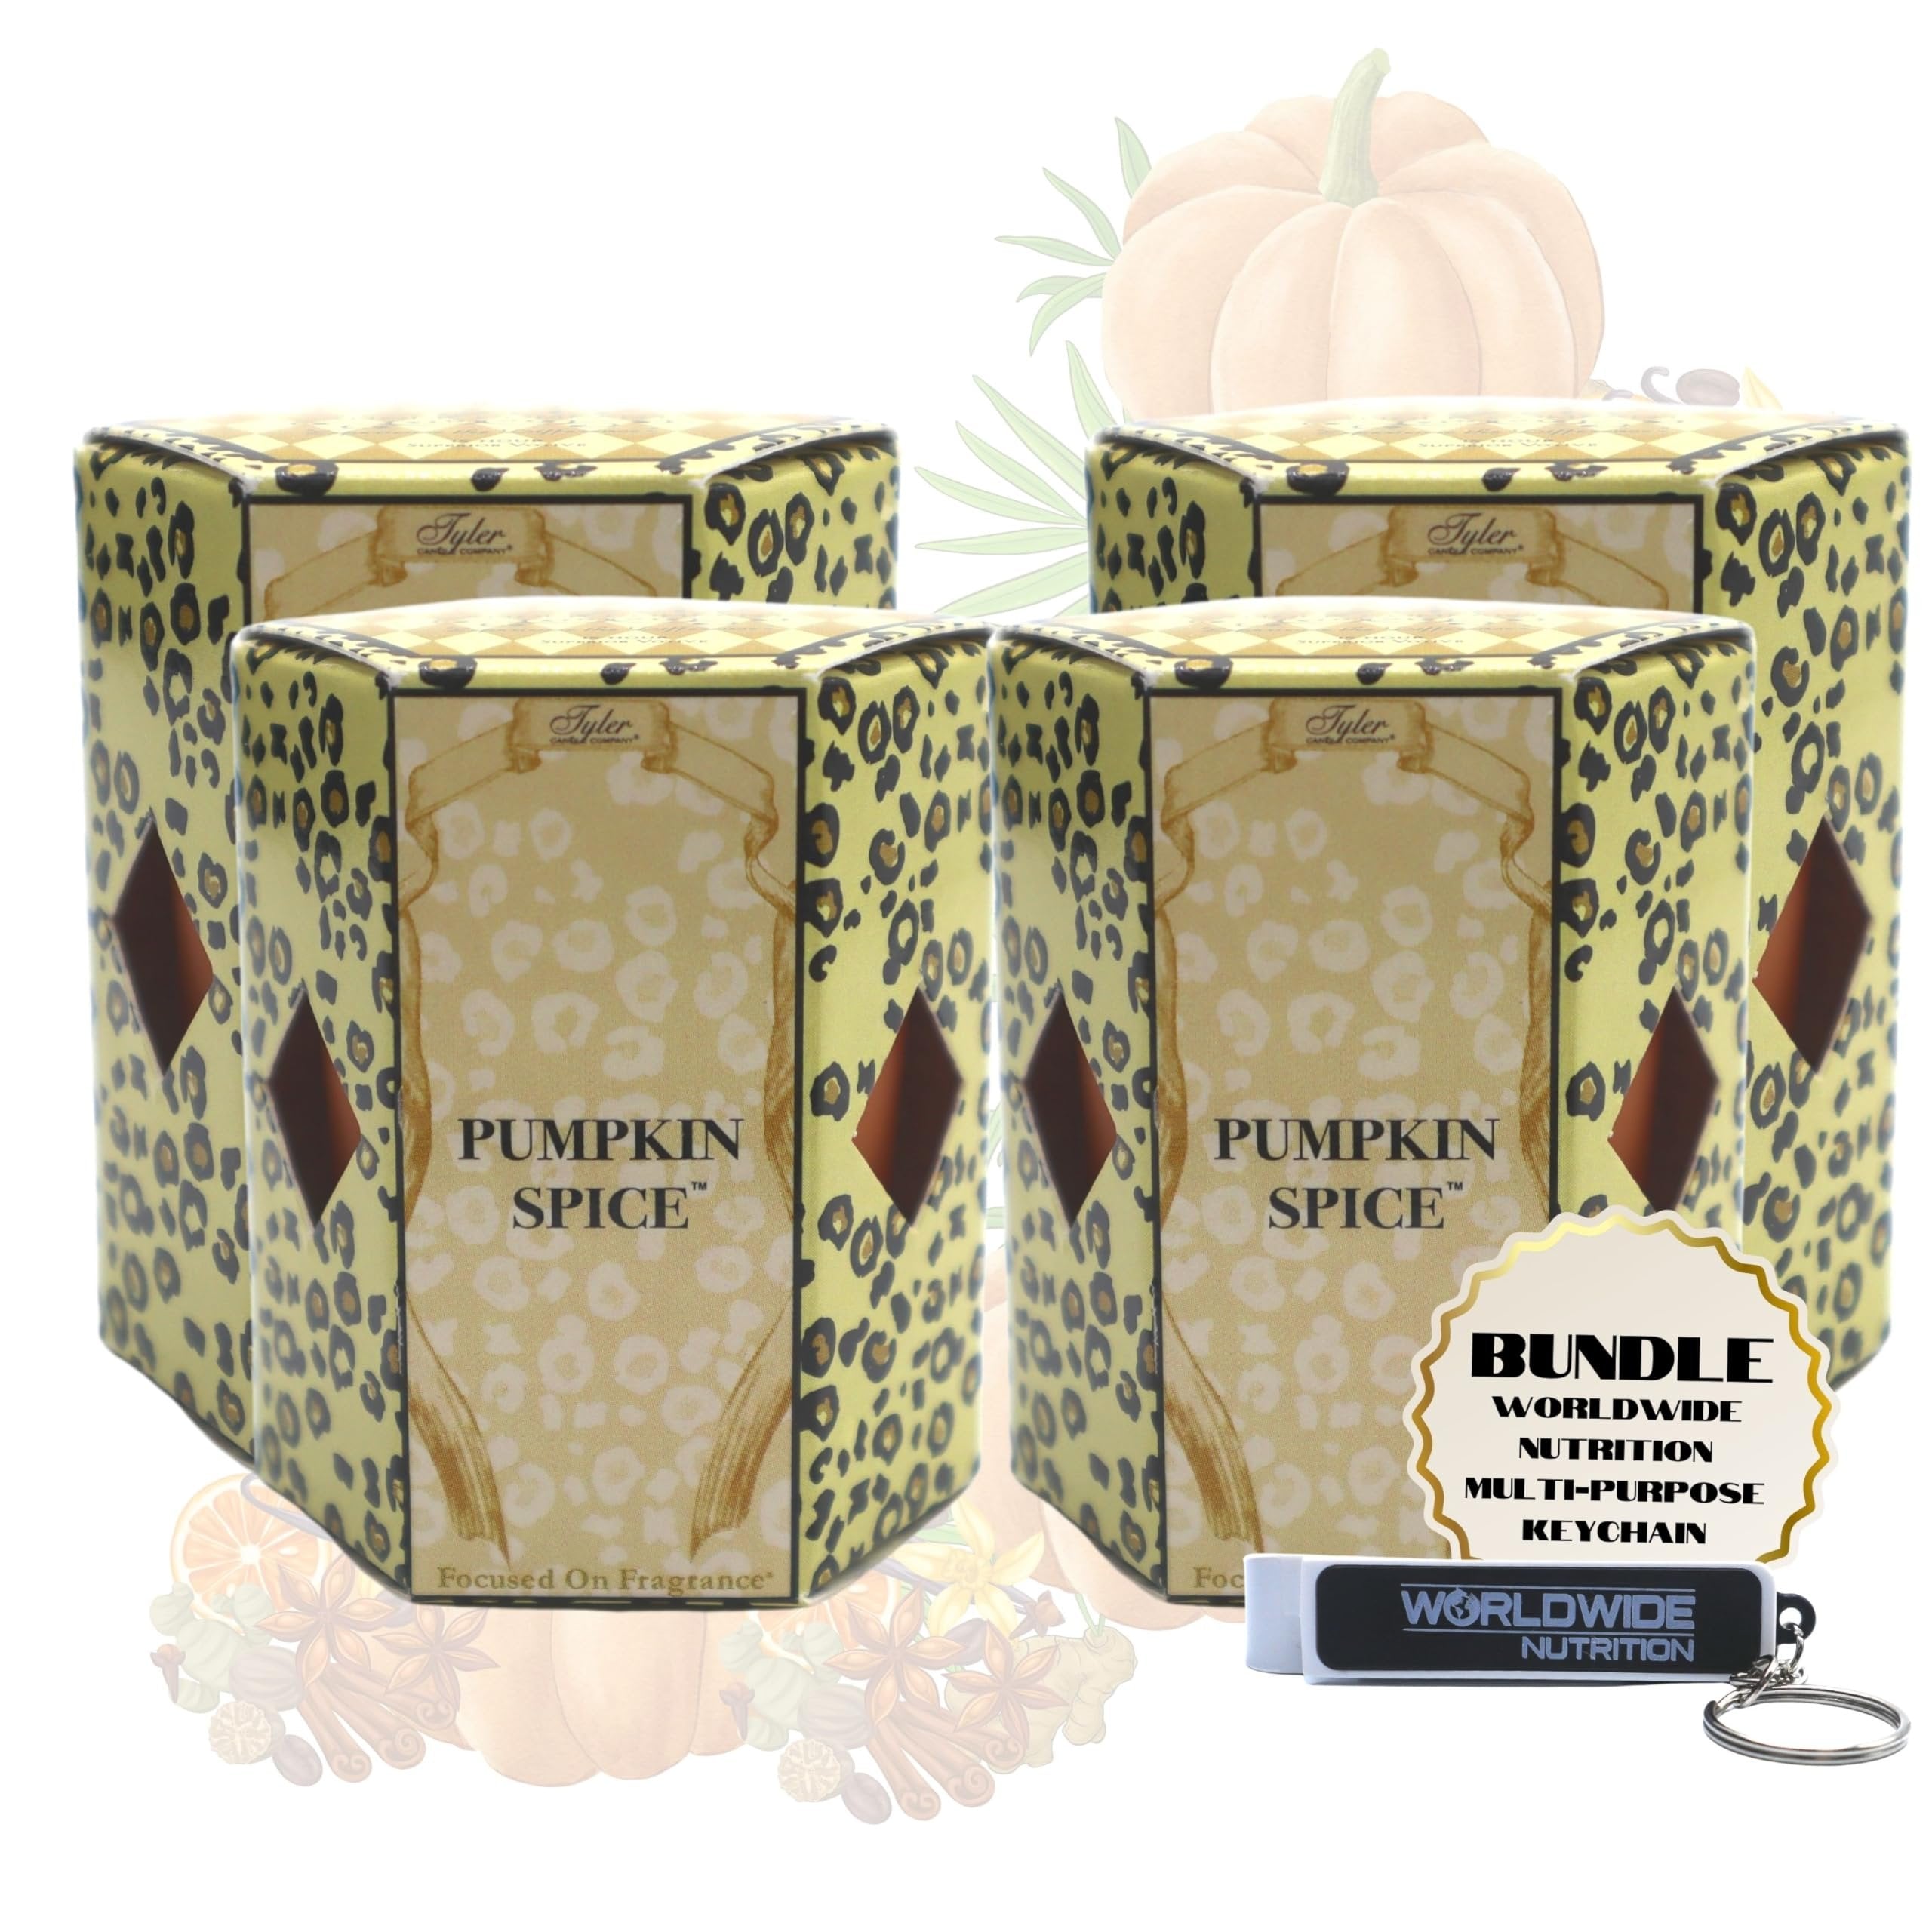 Tyler Candle Company - Tyler Home Fragrance Votive Pumpkin Spice Candle 2Lb Glass Jar 4Ct - Fall Candle Scents, Halloween Candles and Multi-Purpose Key Chain